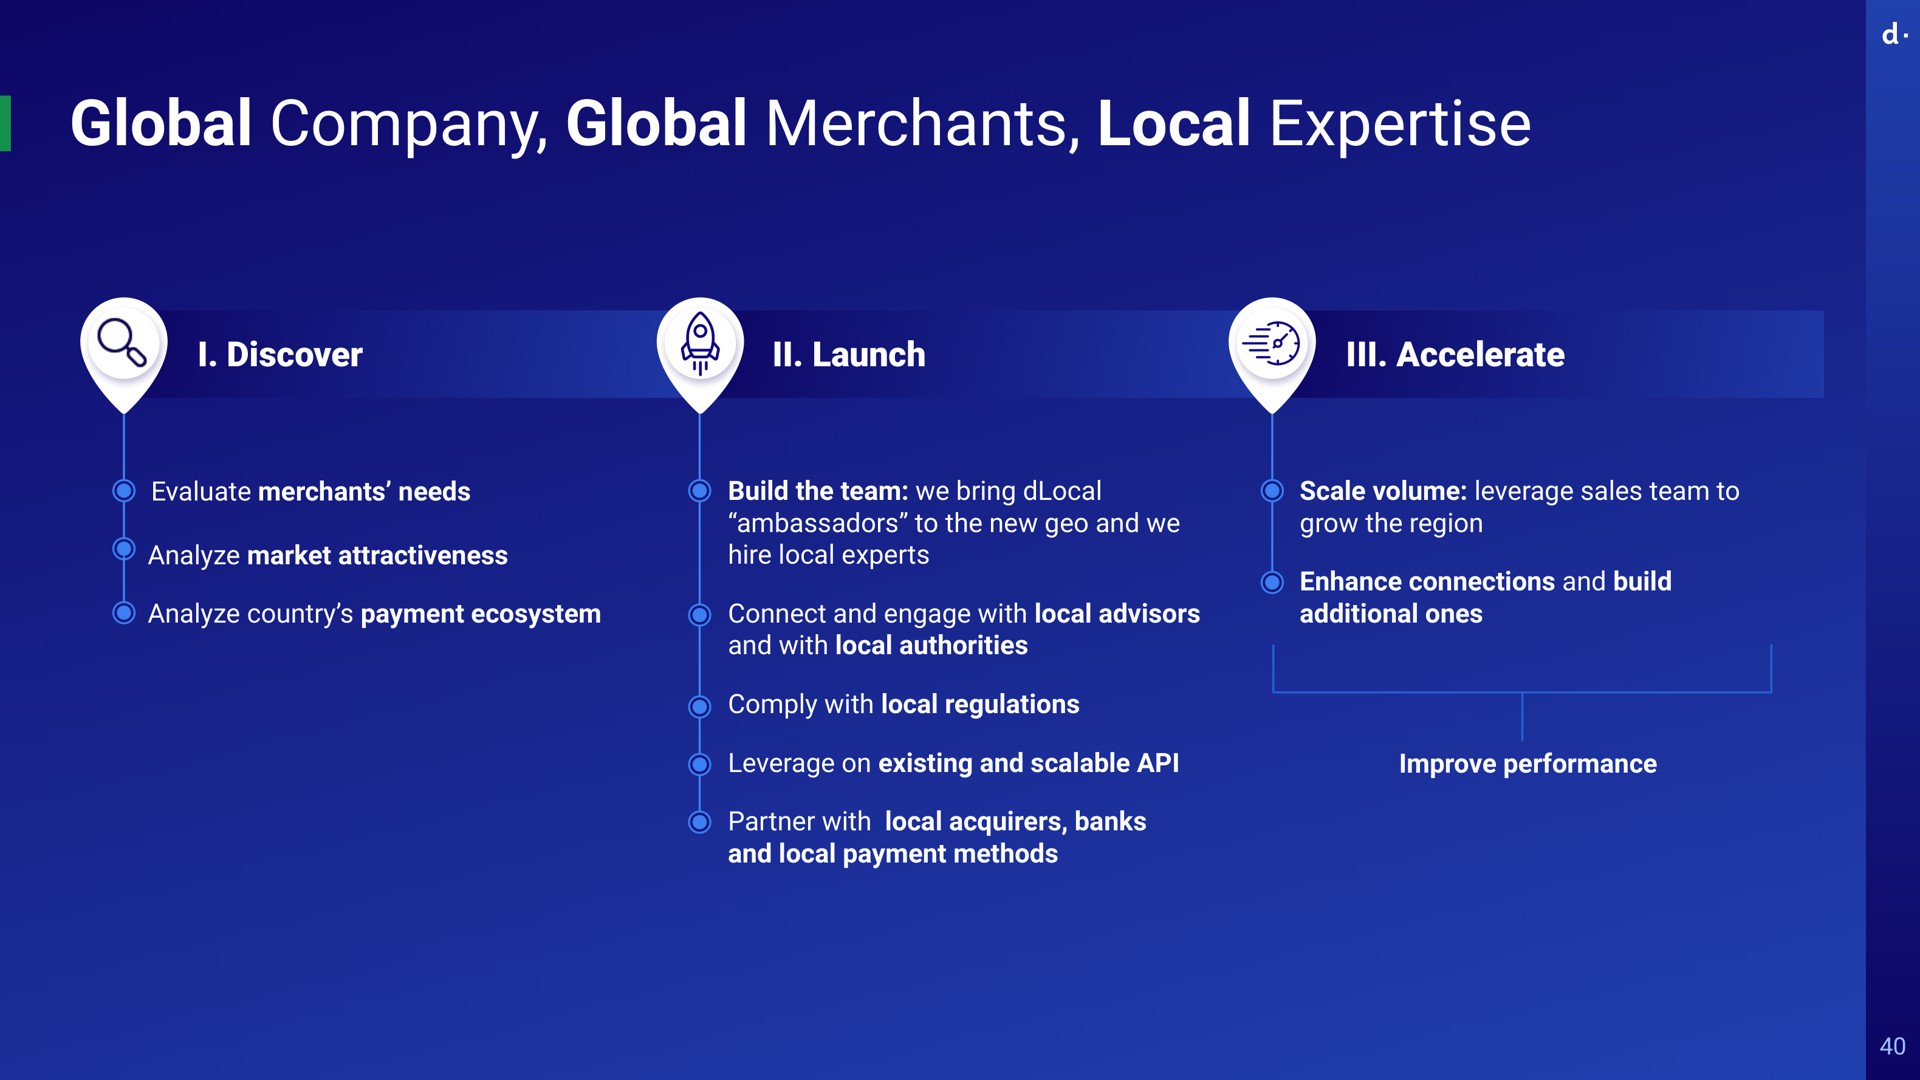 global company global merchants local i discover launch accelerate evaluate merchants needs analyze market attractiveness analyze country payment ecosystem build the team we bring ambassadors to the new geo and we hire local experts connect and engage with local advisors and with local authorities comply with local regulations scale volume leverage sales team to grow the region enhance connections and build additional ones leverage on existing and scalable improve performance partner with local acquirers banks and local payment methods tore tire ill | dLocal